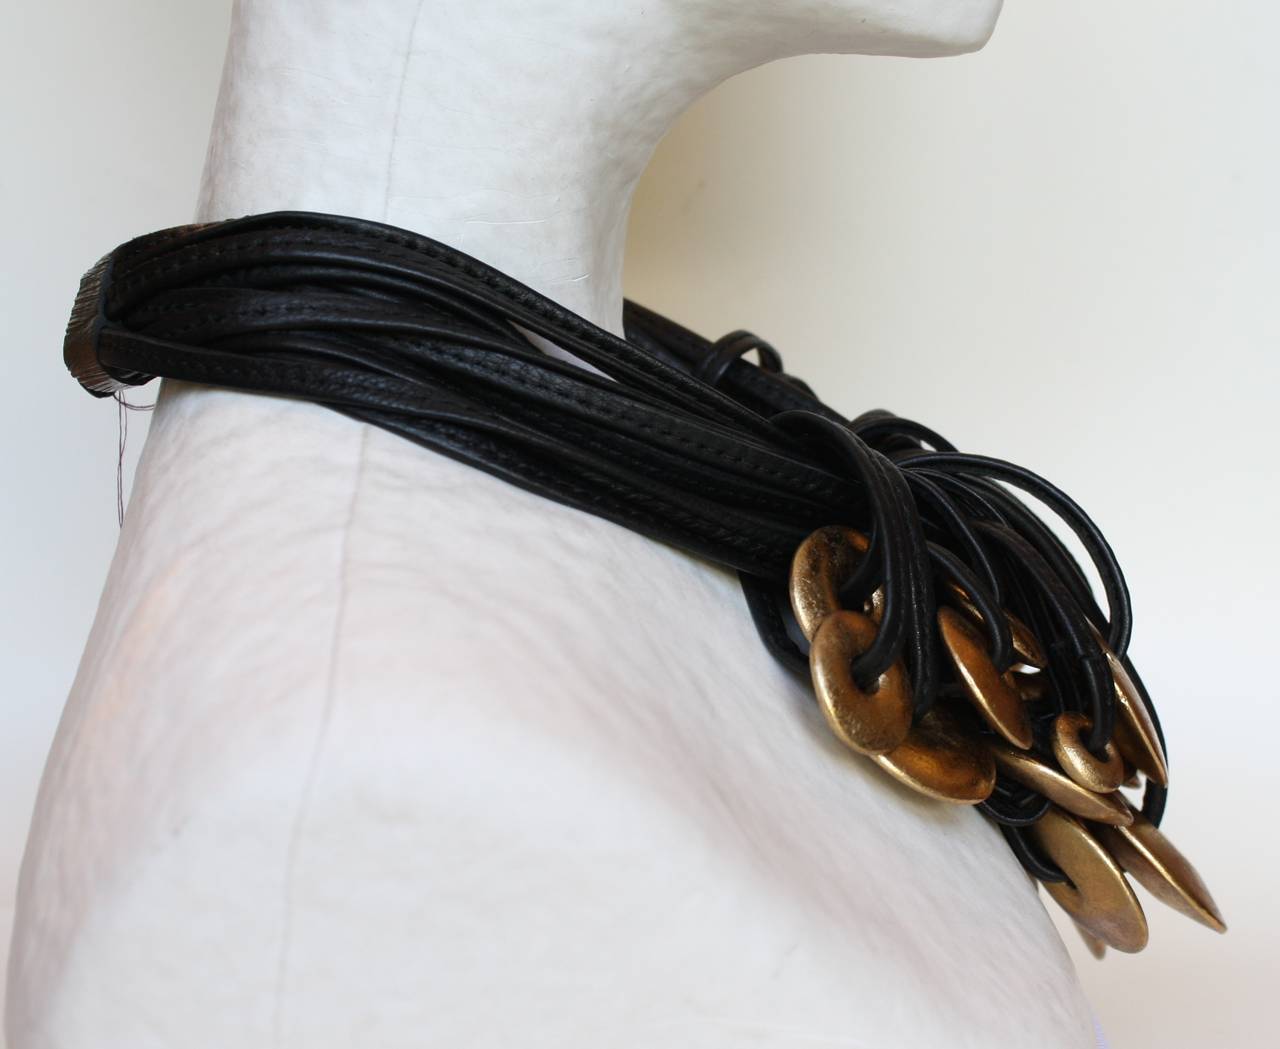 Multiple strands of black leather house countless gold foiled wood discs in this unbelievably soft and lightweight modern necklace from Monies. Wood clasp.

18